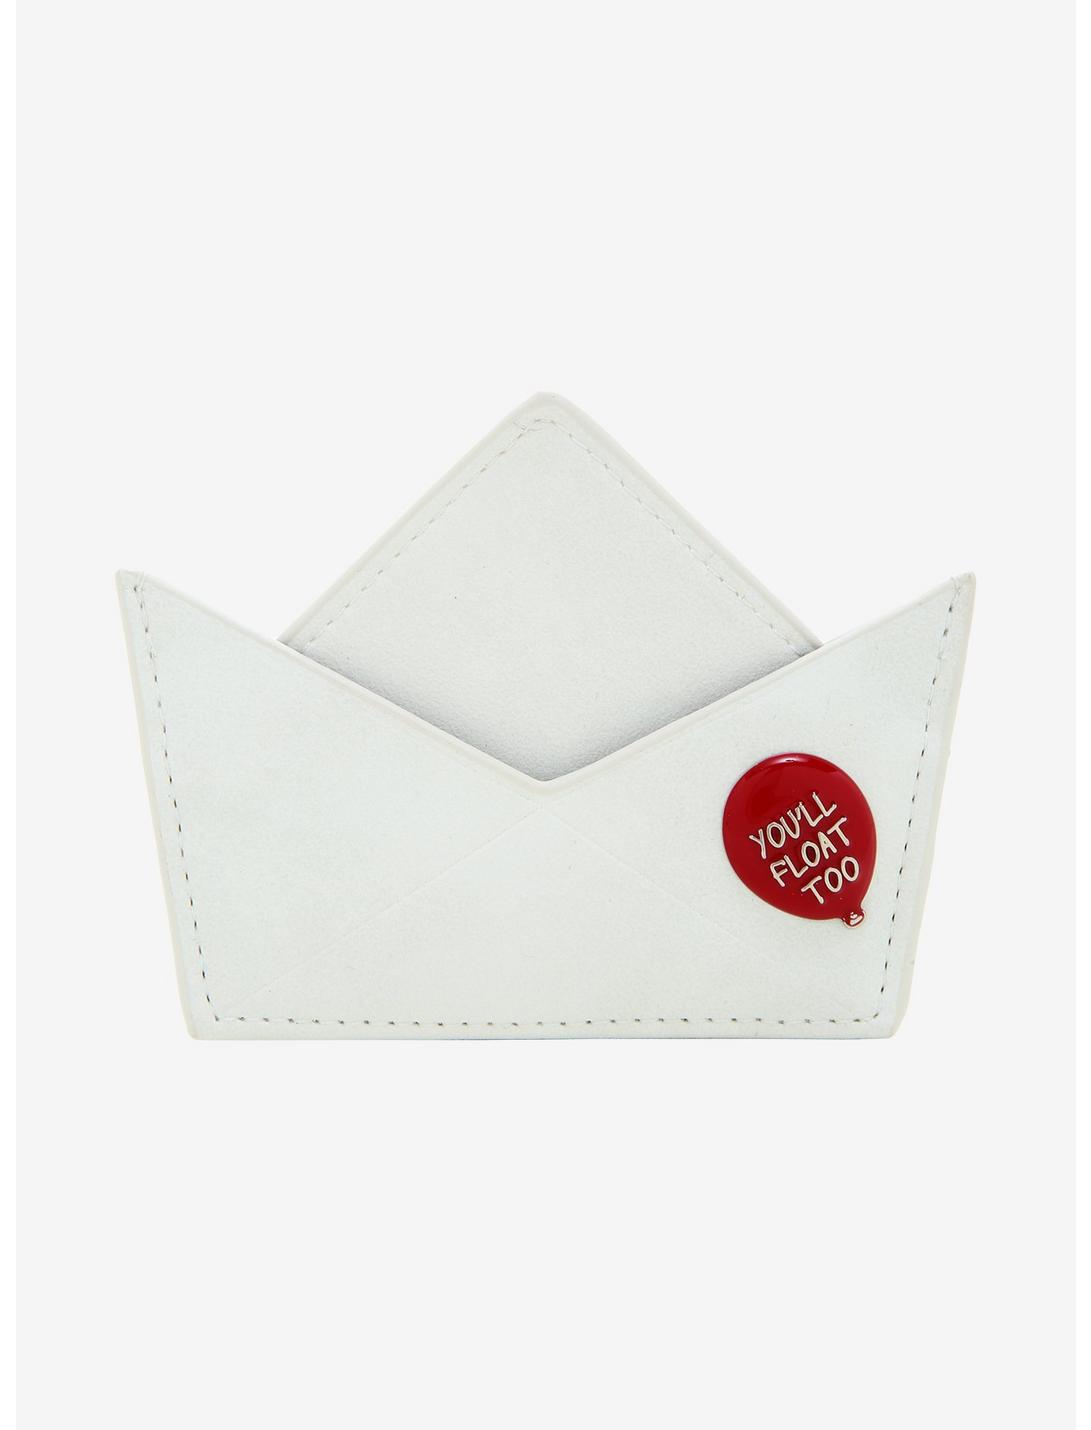 IT S.S. Georgie Paper Boat Cardholder - BoxLunch Exclusive, , hi-res